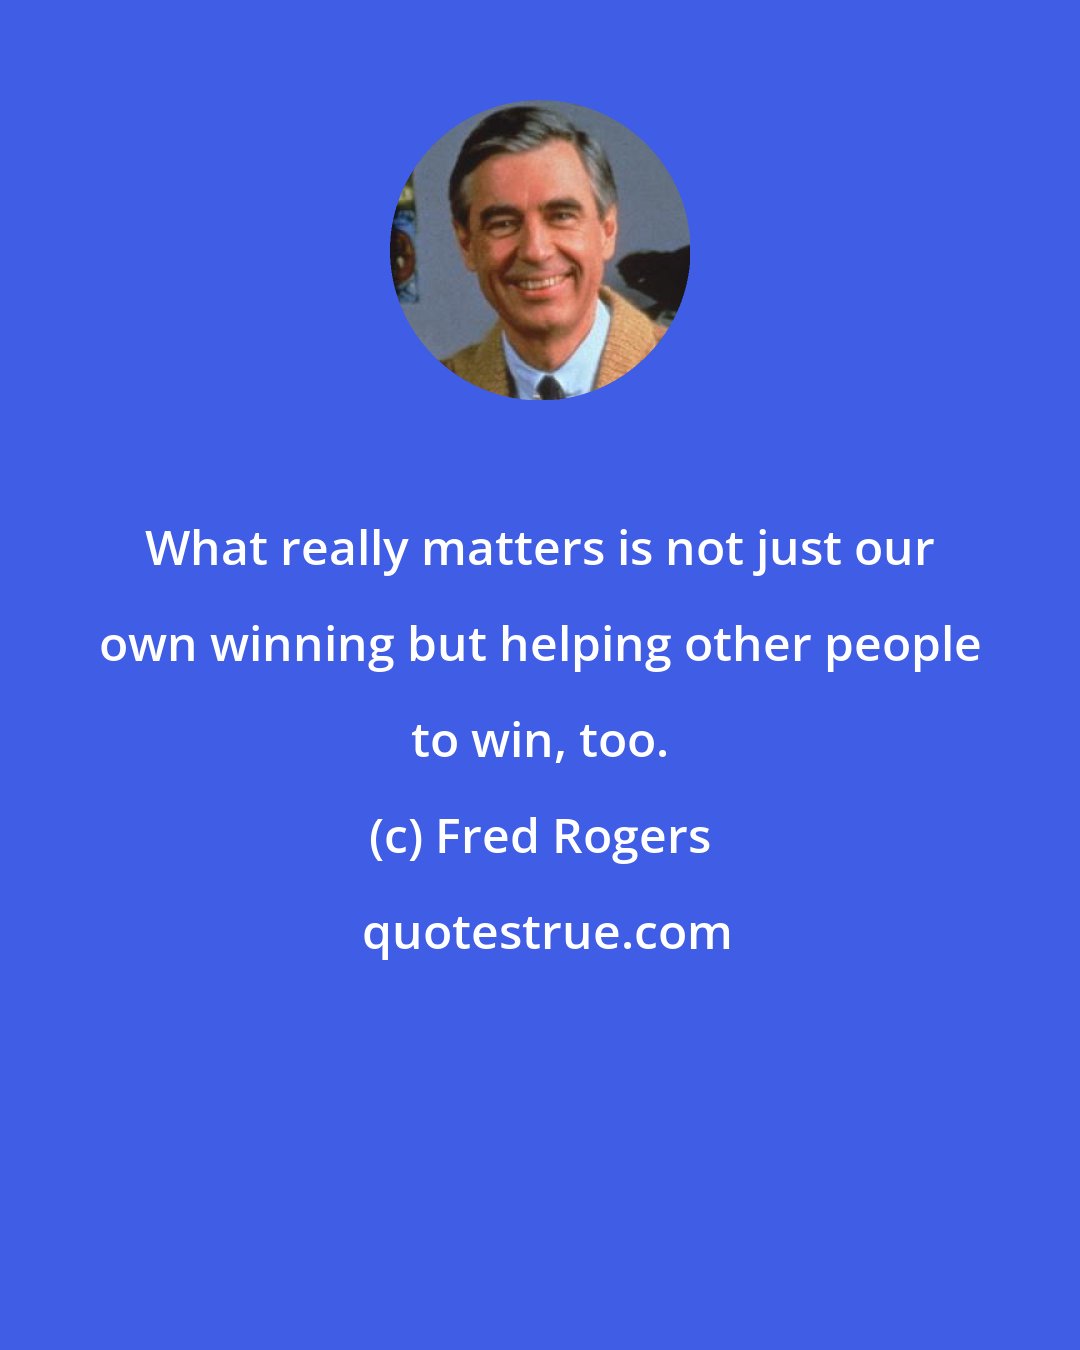 Fred Rogers: What really matters is not just our own winning but helping other people to win, too.